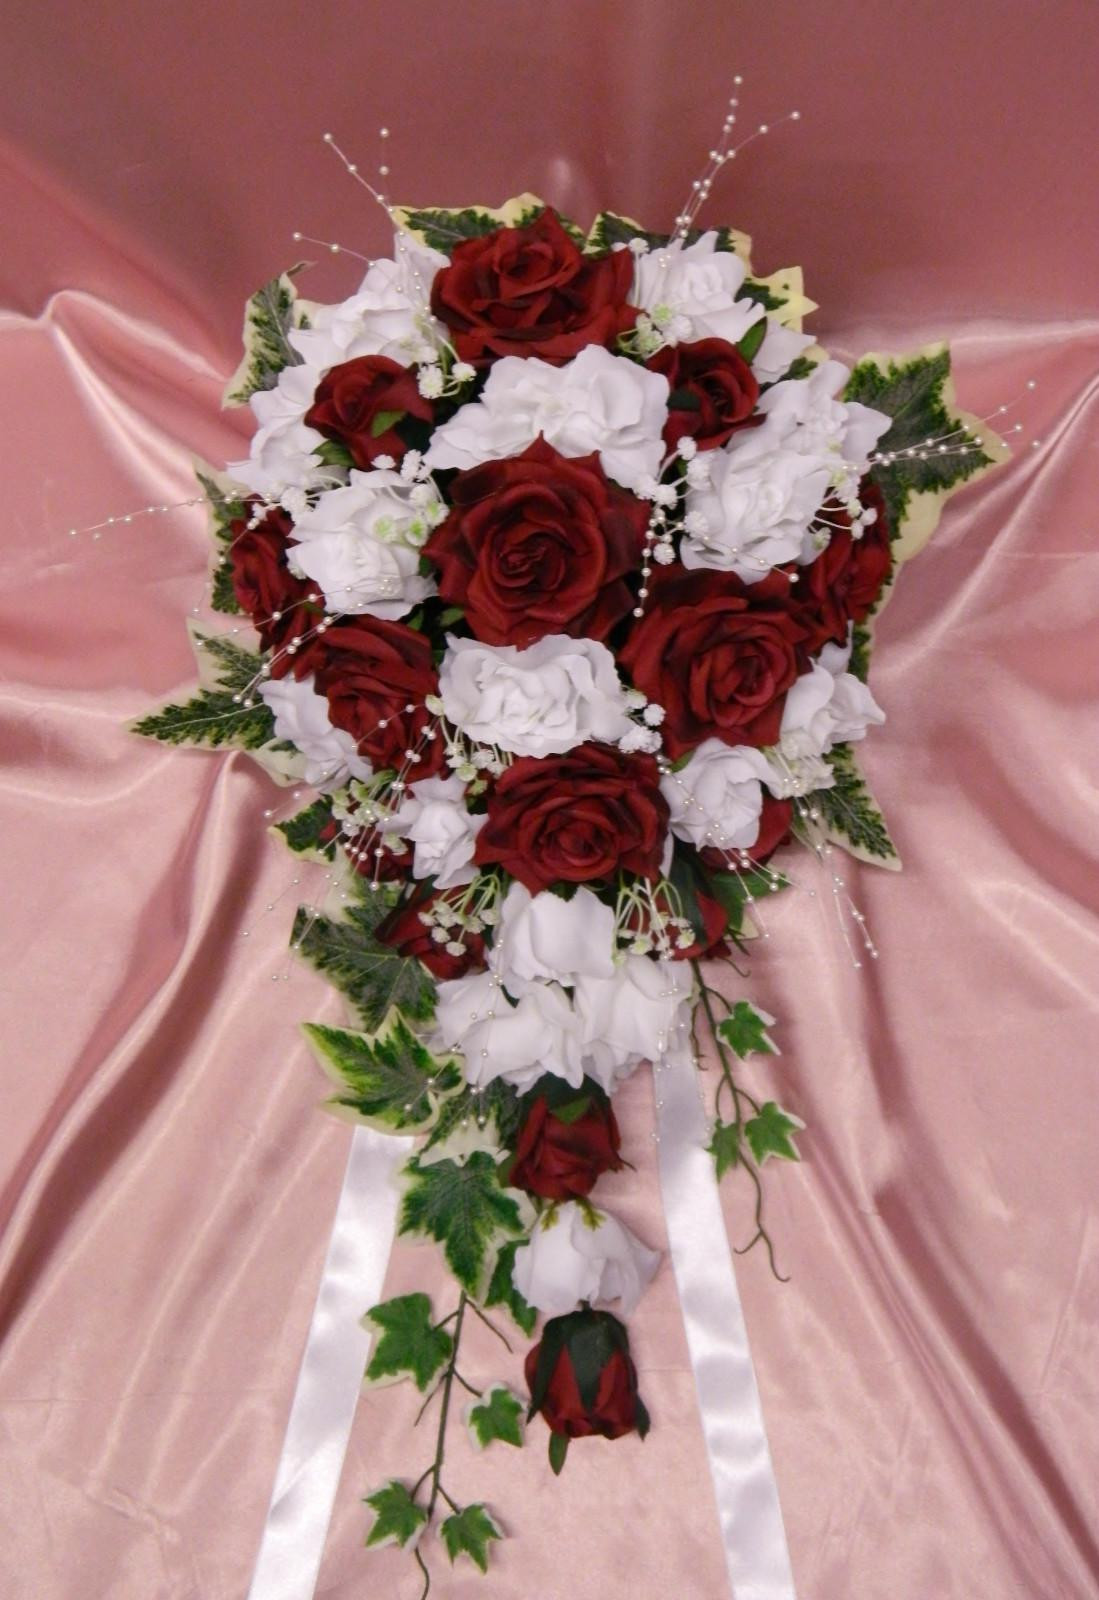 Wholesale Flowers Wedding
 Wholesale Silk Artificial Wedding Flowers Roses With Ivy